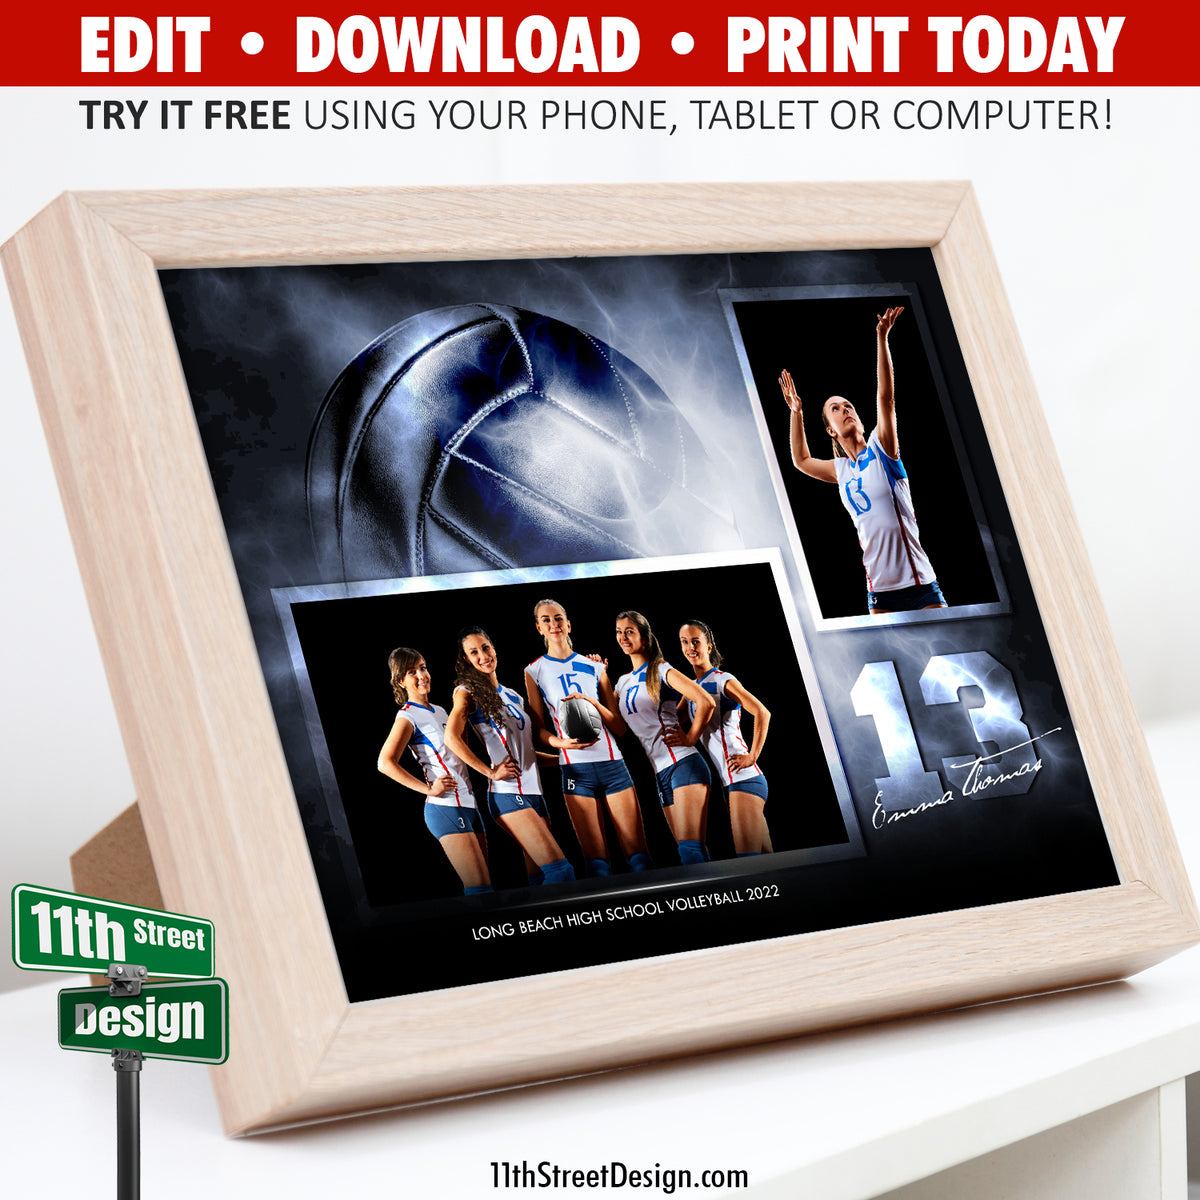 Volleyball Memory Mates • Online Editable 8x10 Sport Team Photo Template • Print Today • Digital Download • DIY Printable • Electric Explosion